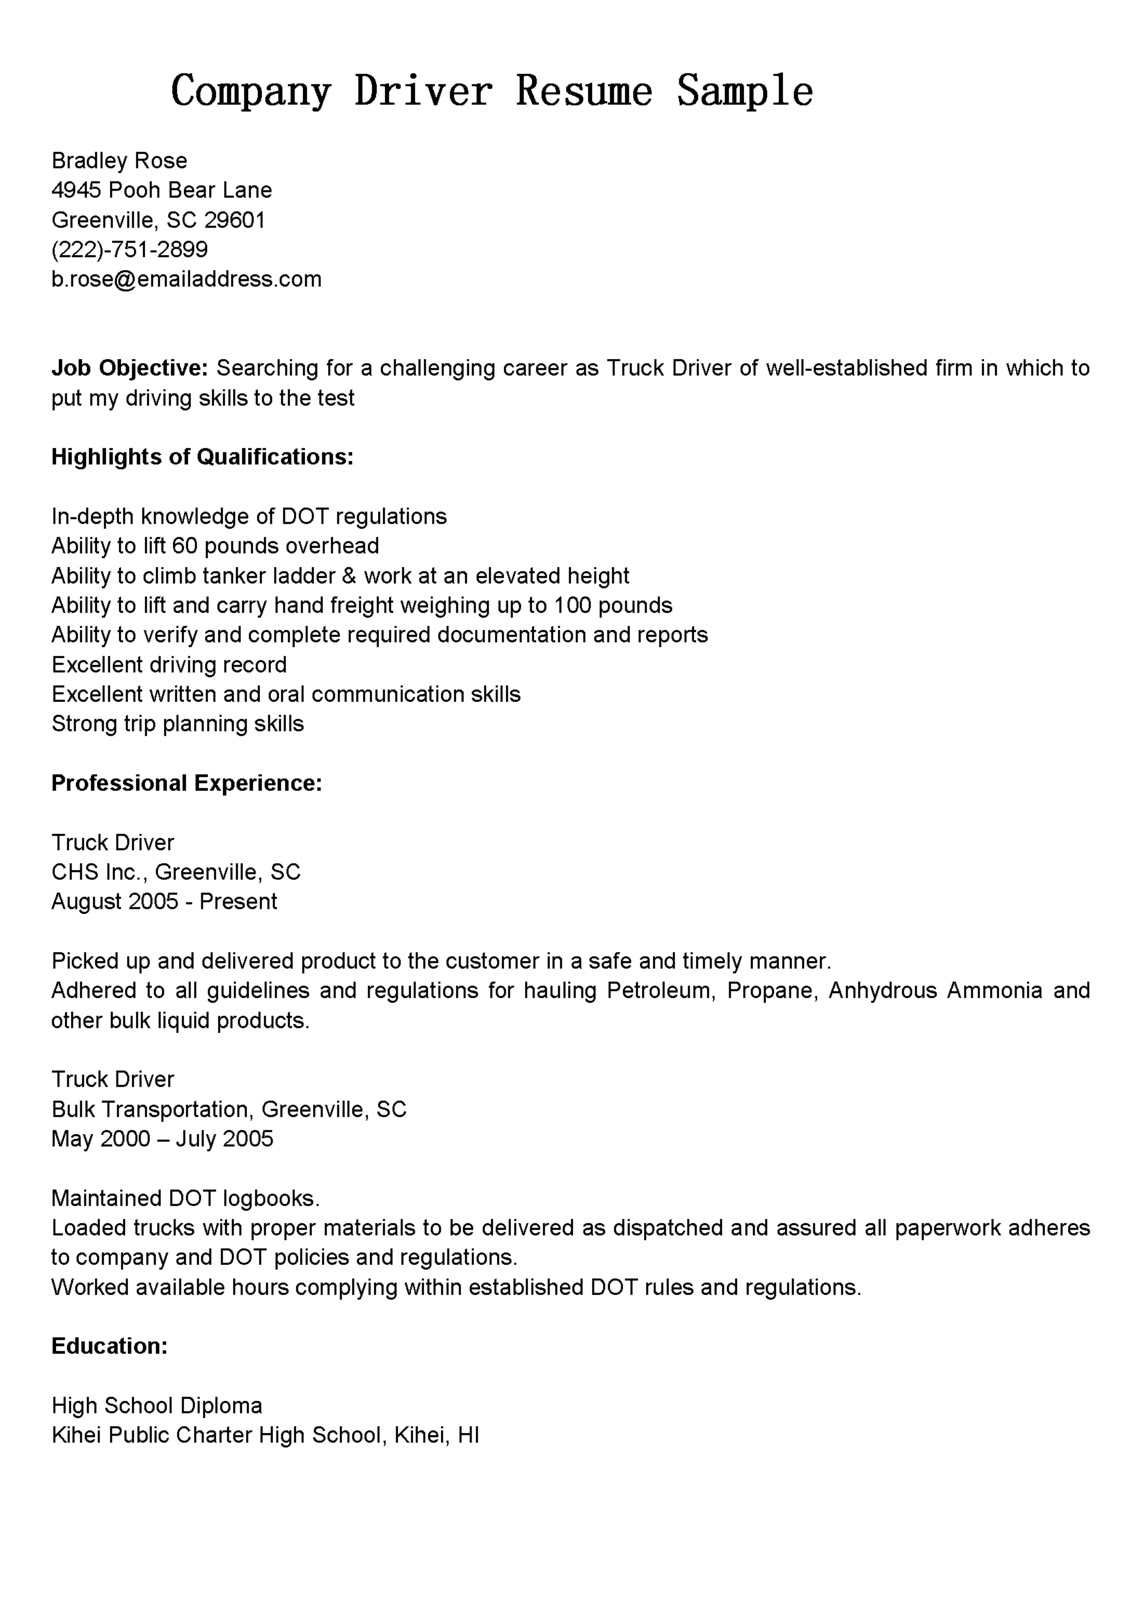 Resume truck driver template